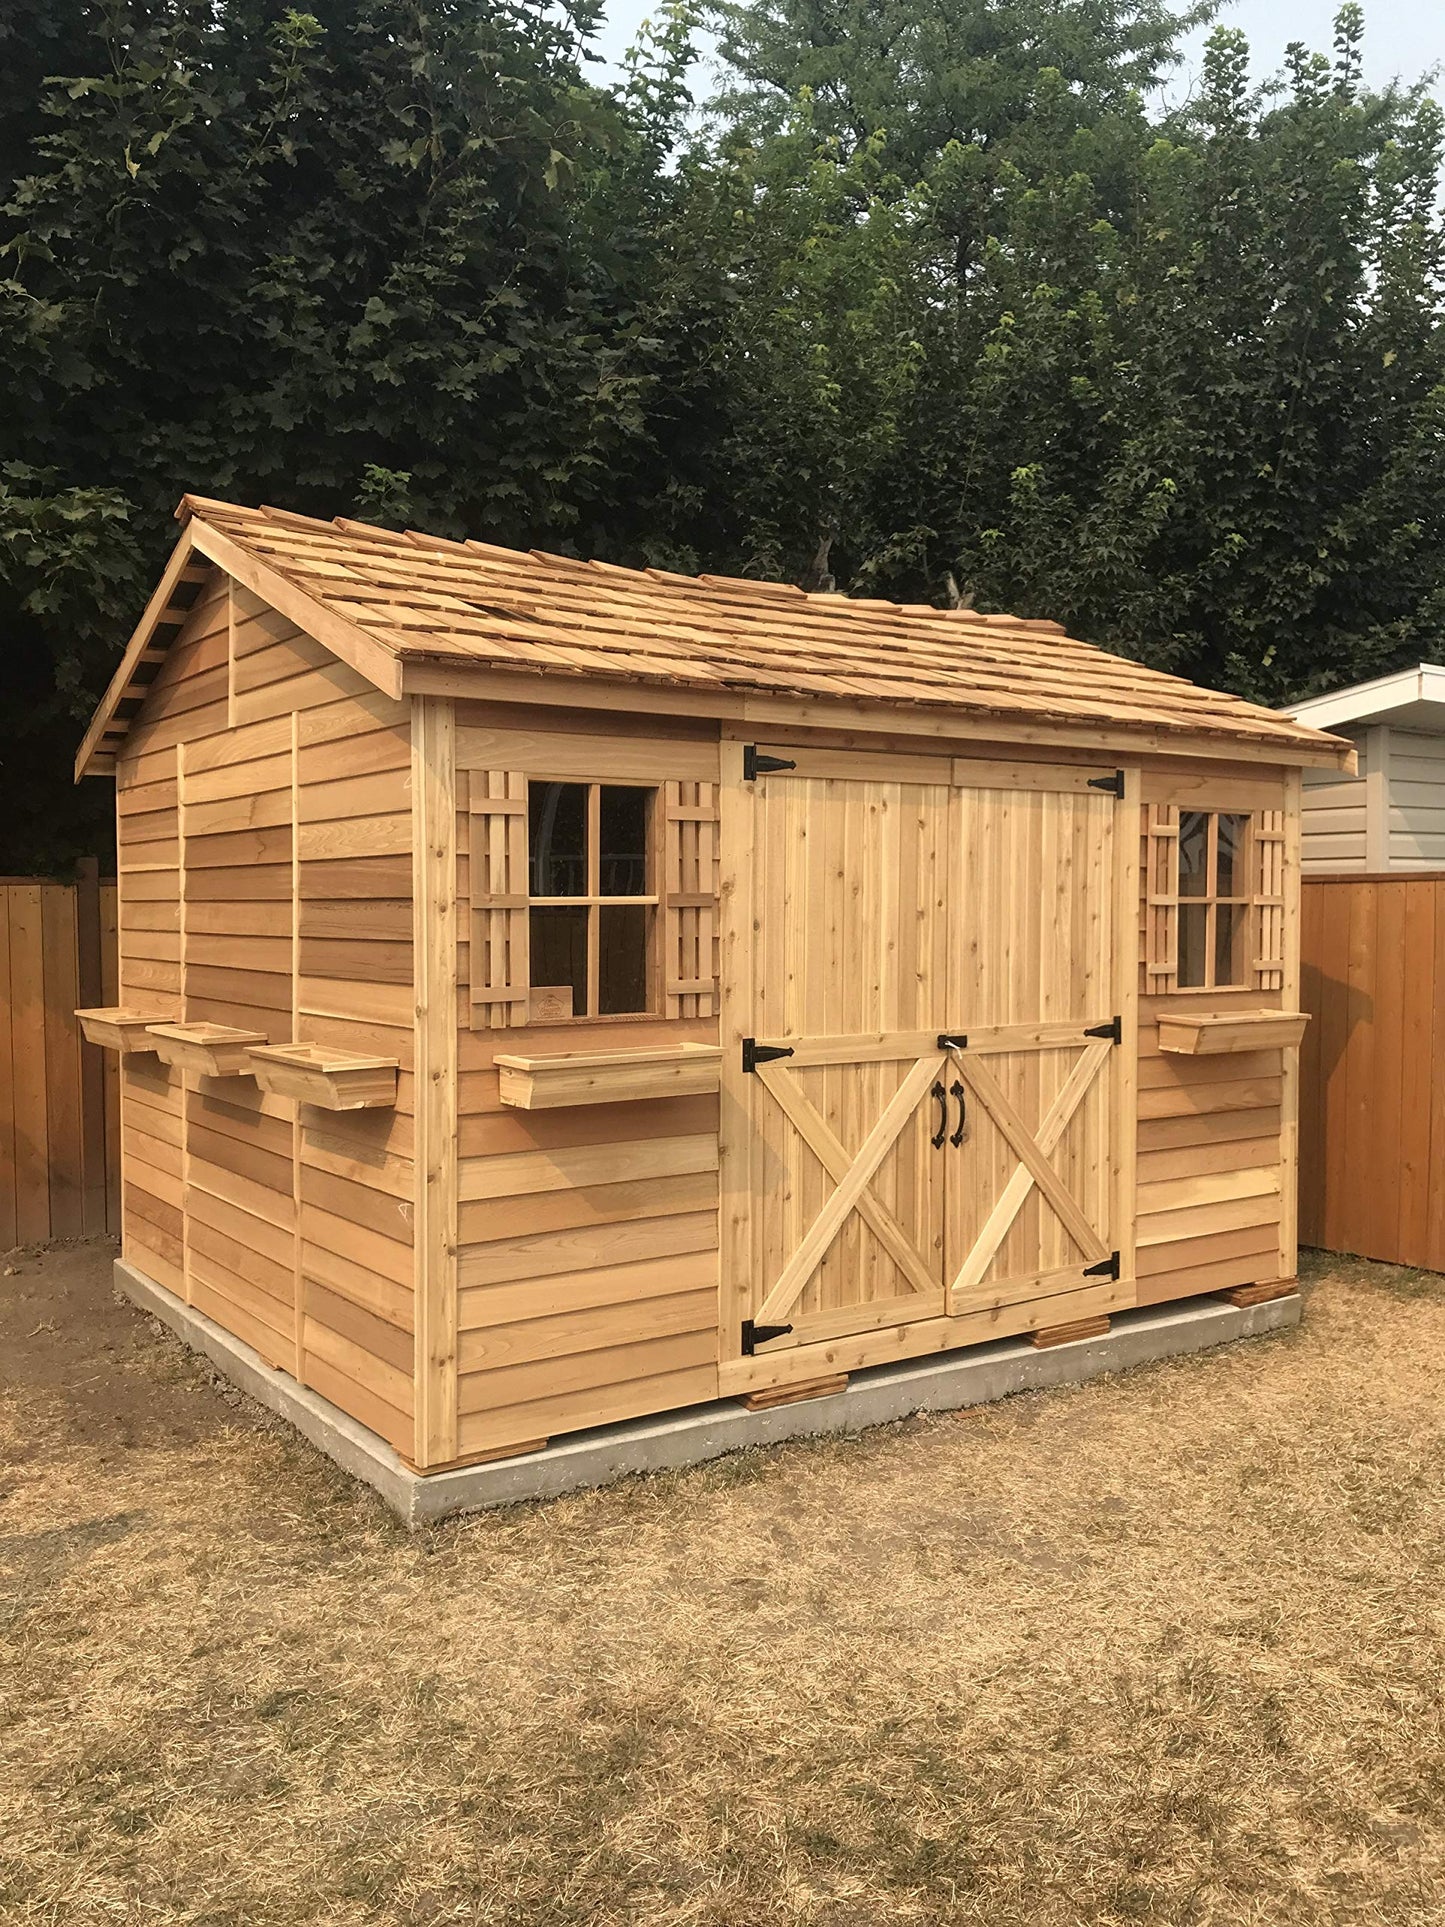 LongHouse 12 x 10 by Cedarshed